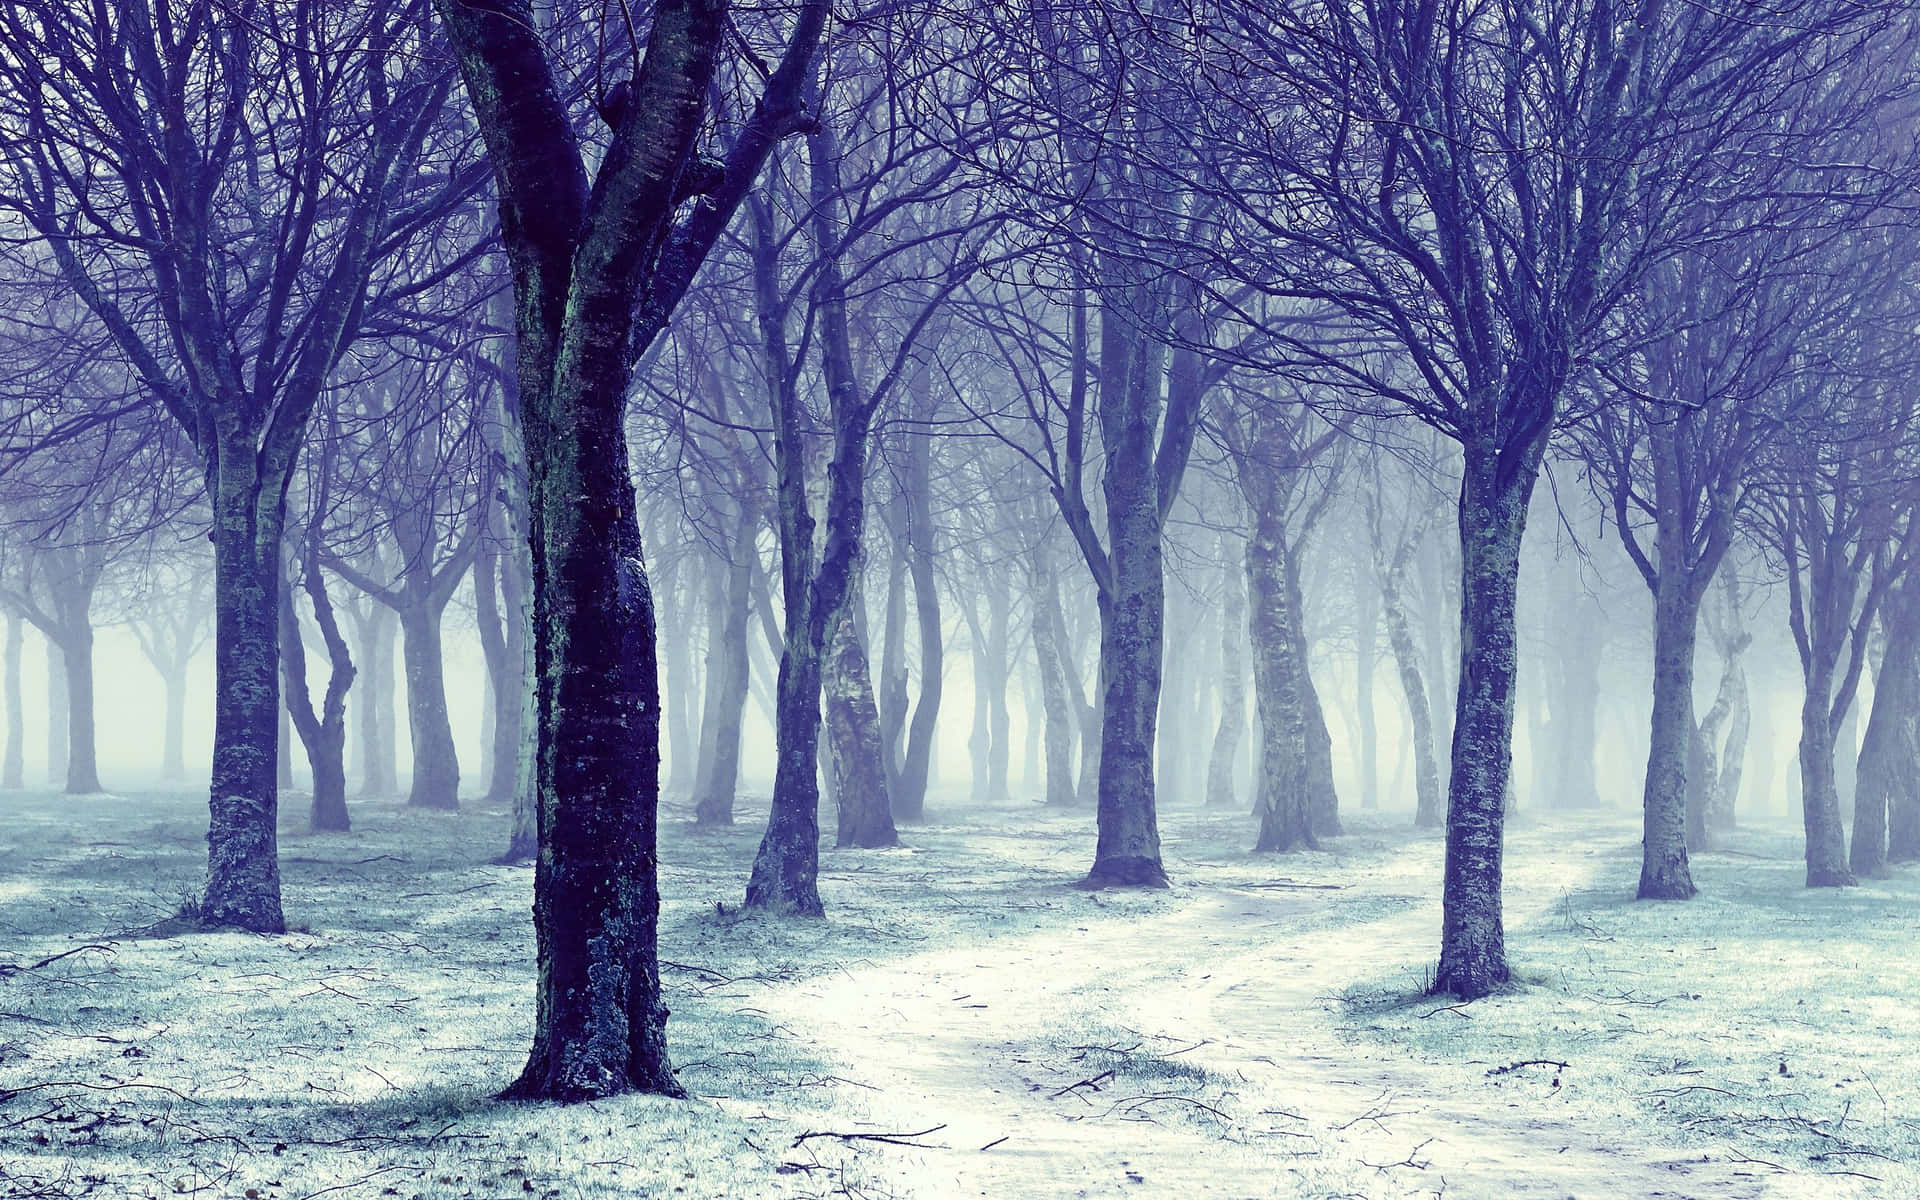 Majestic Snow-Covered Trees in a Winter Wonderland Wallpaper